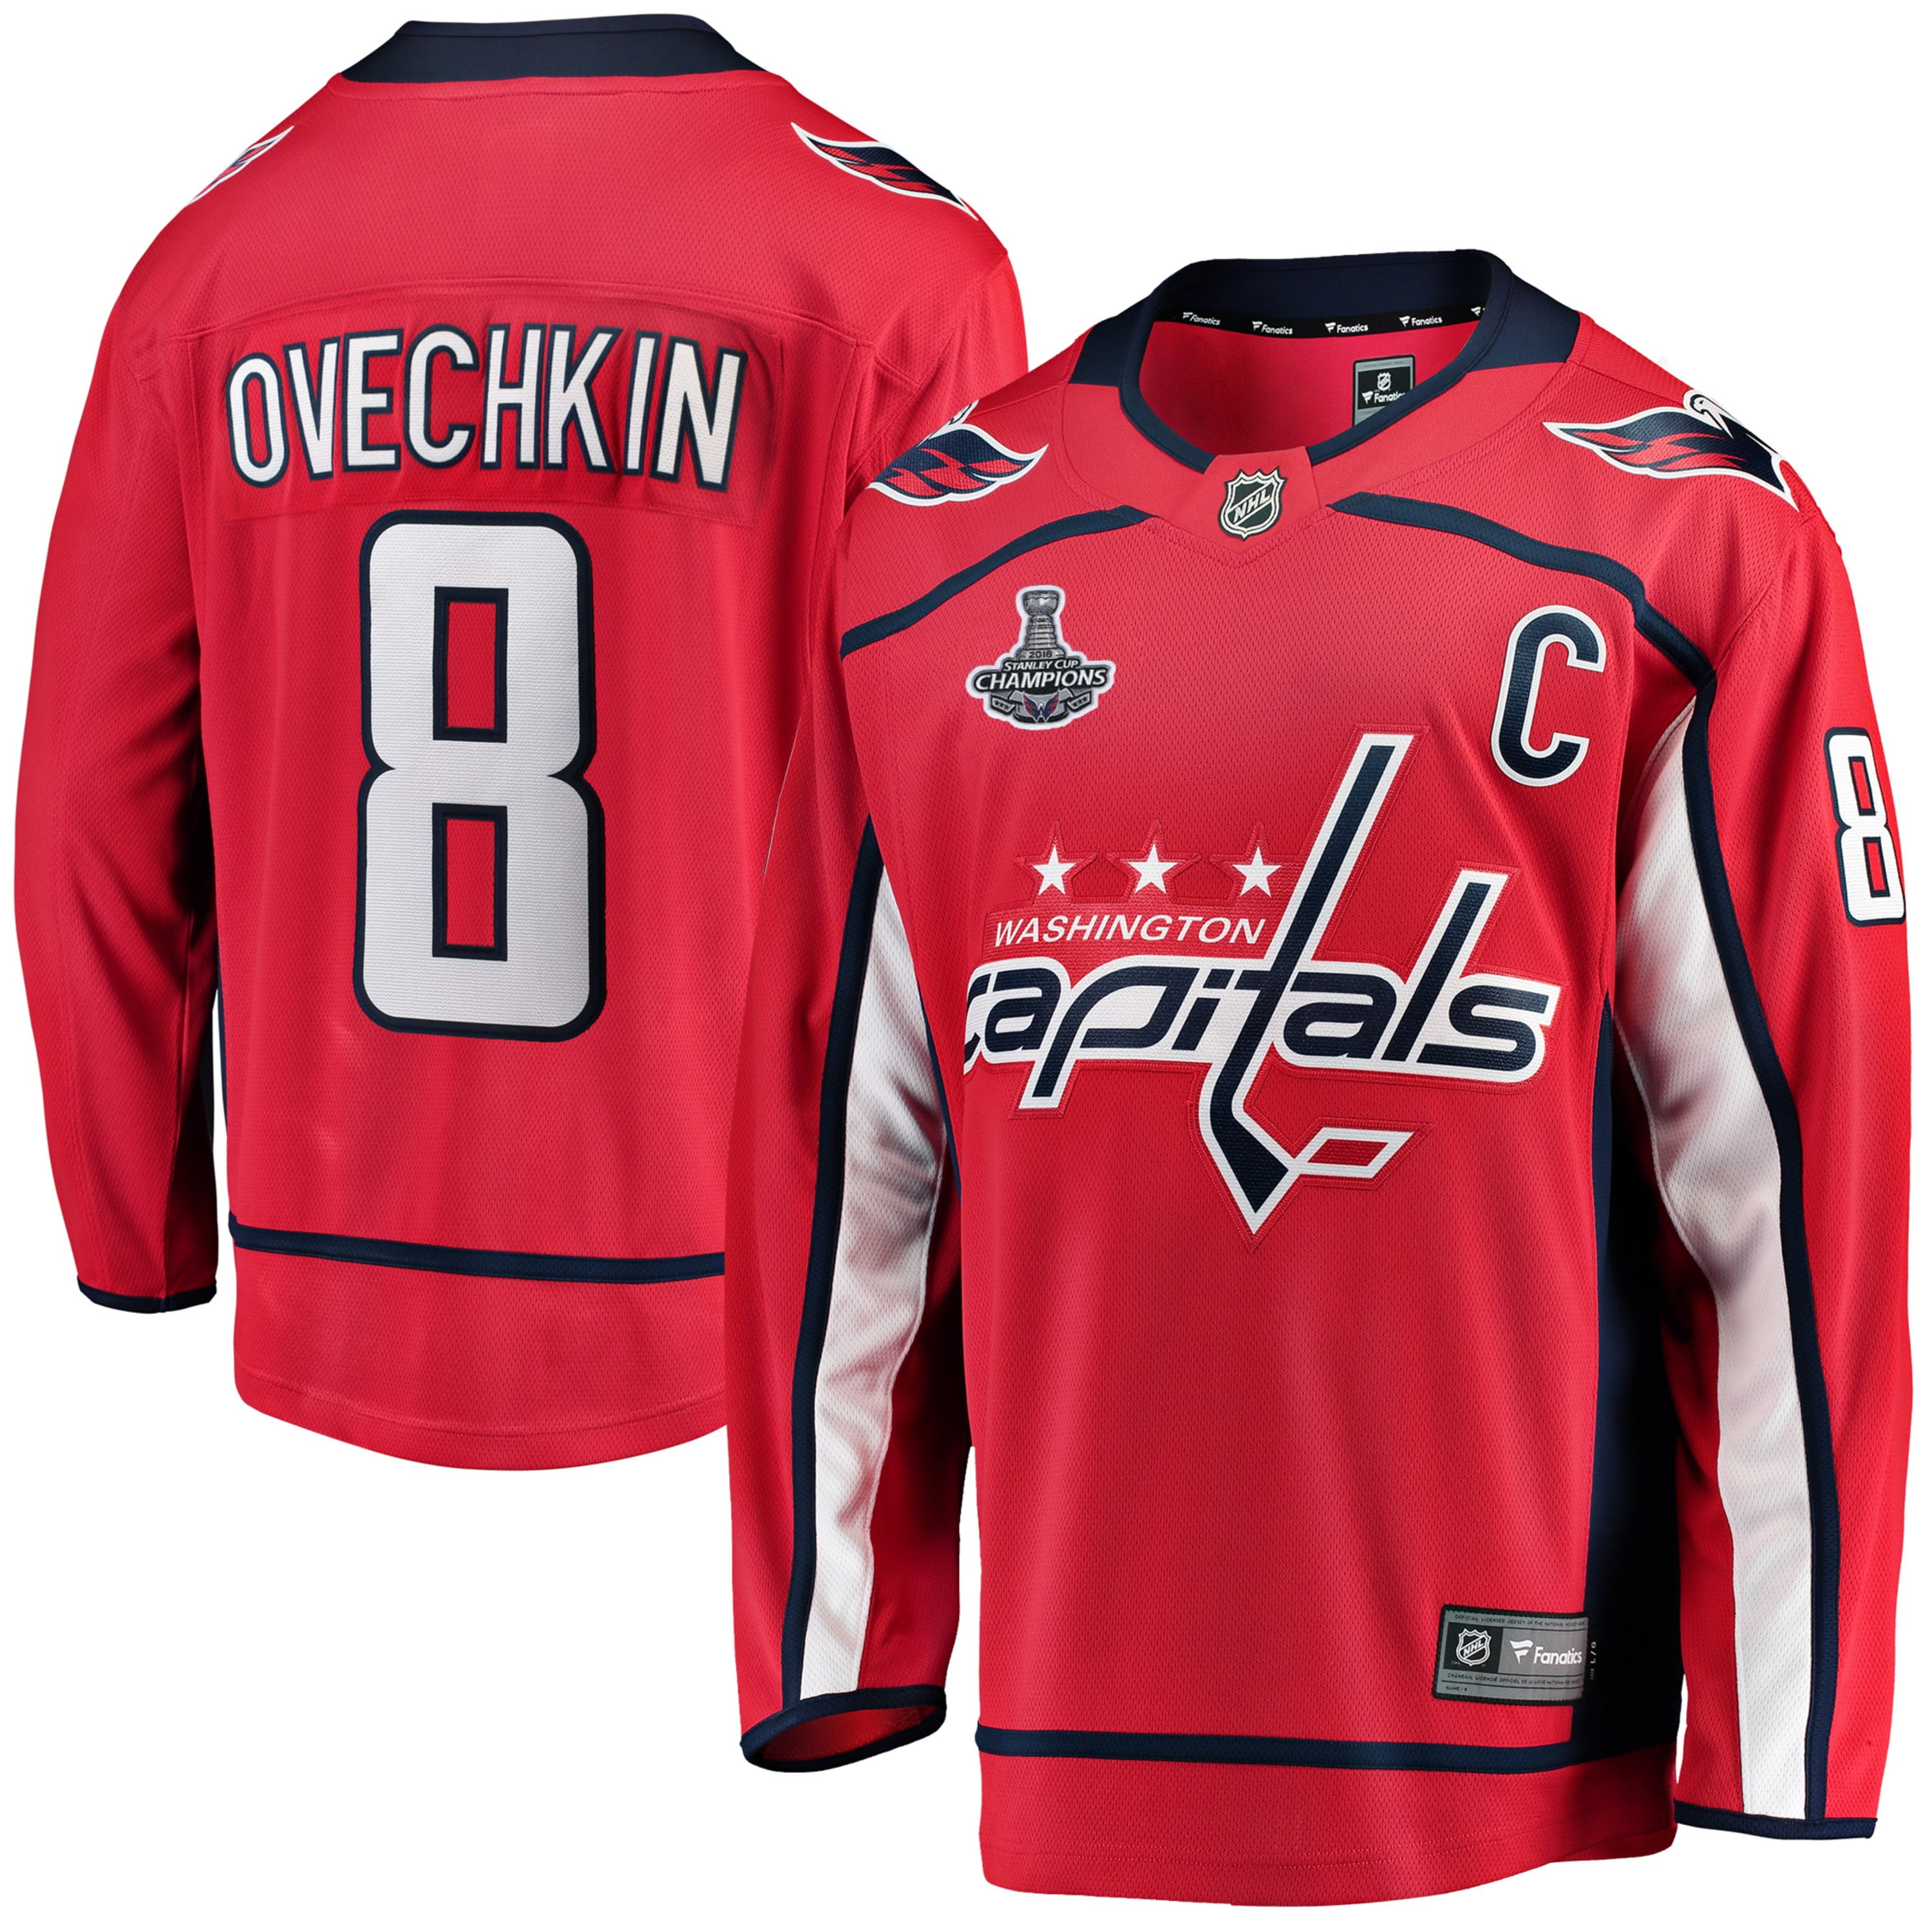 alex ovechkin jersey number